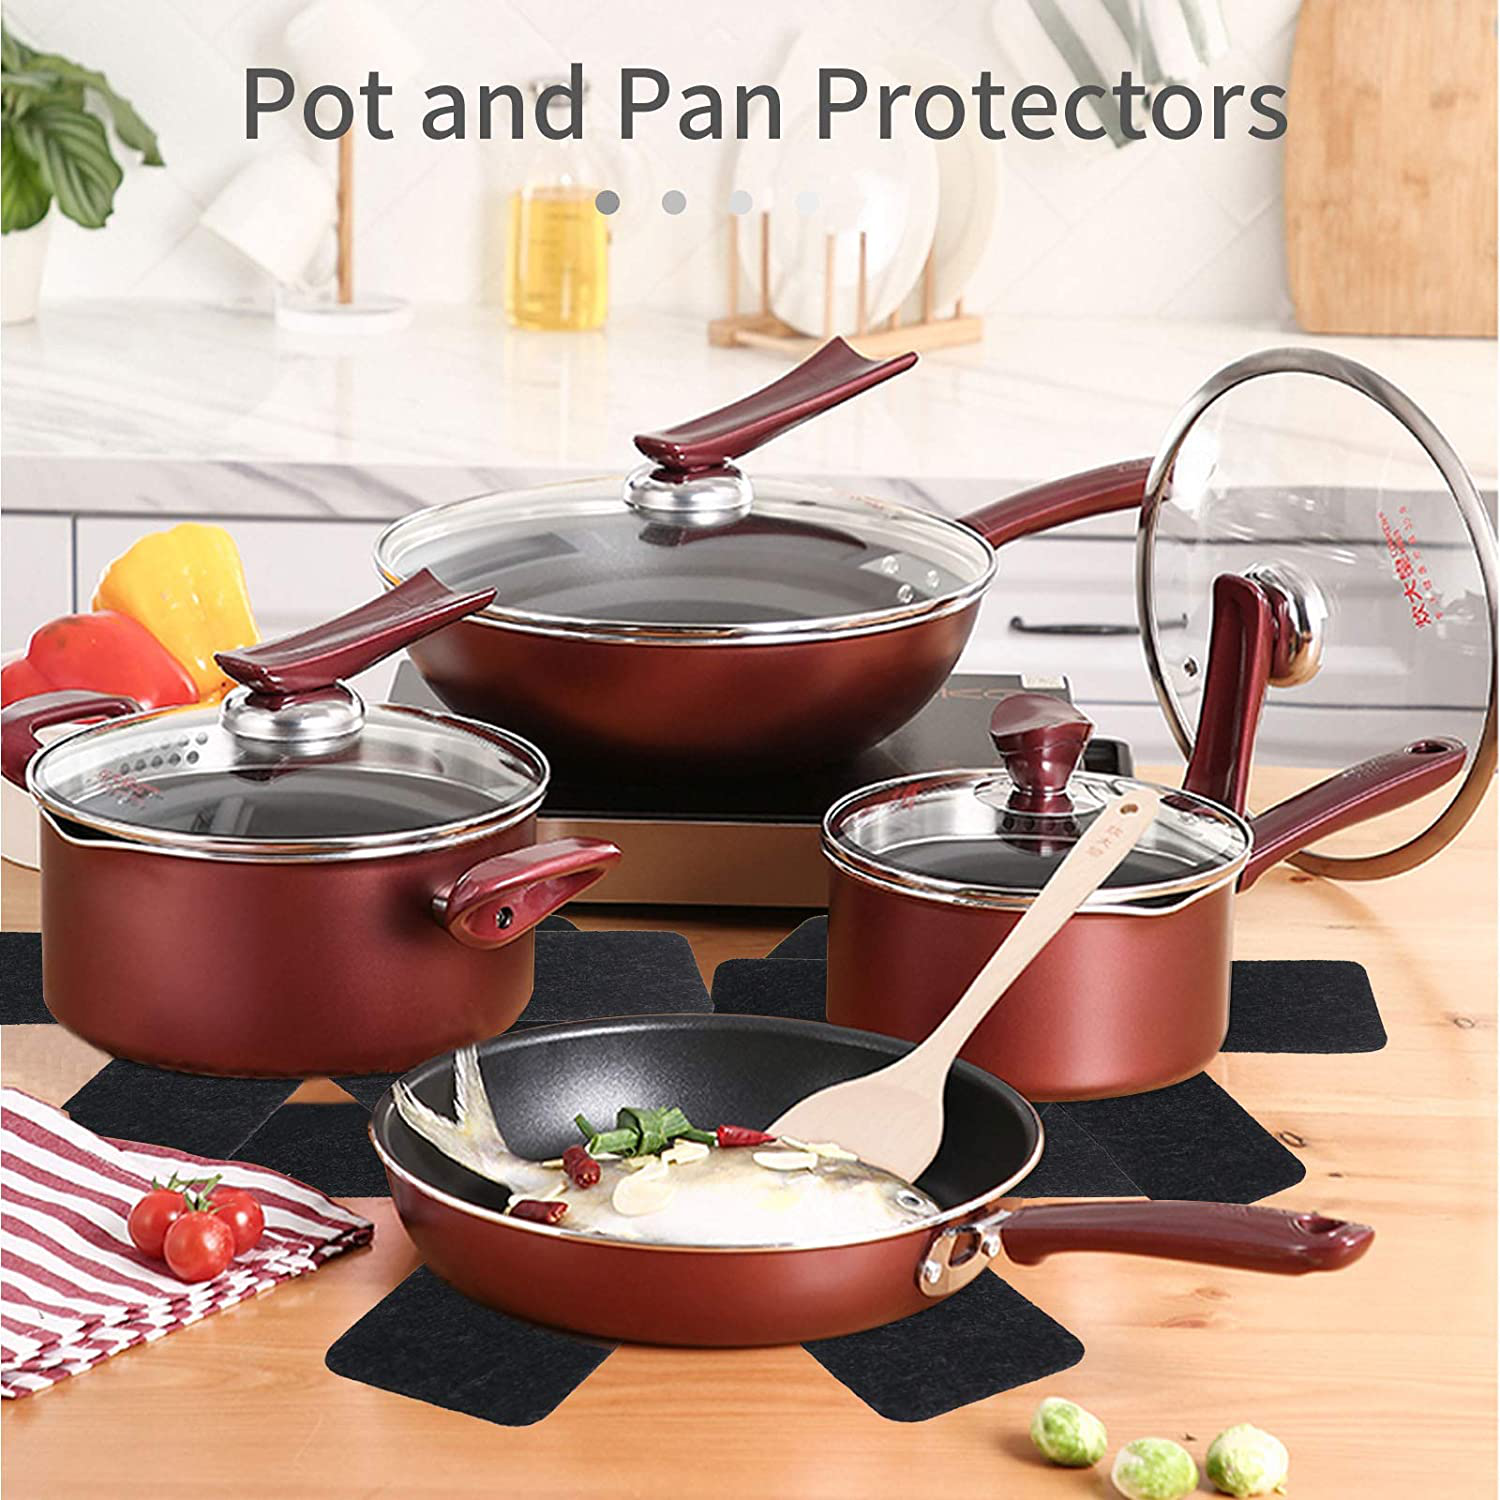 Newthinking Pot and Pan Protectors, Set of 12 and 3 Different Size, Pot Dividers Pads, Stacking Pan Protectors, Pan Separators Pads for Prevent Scratching, Separate and Protect Dishes (Black)